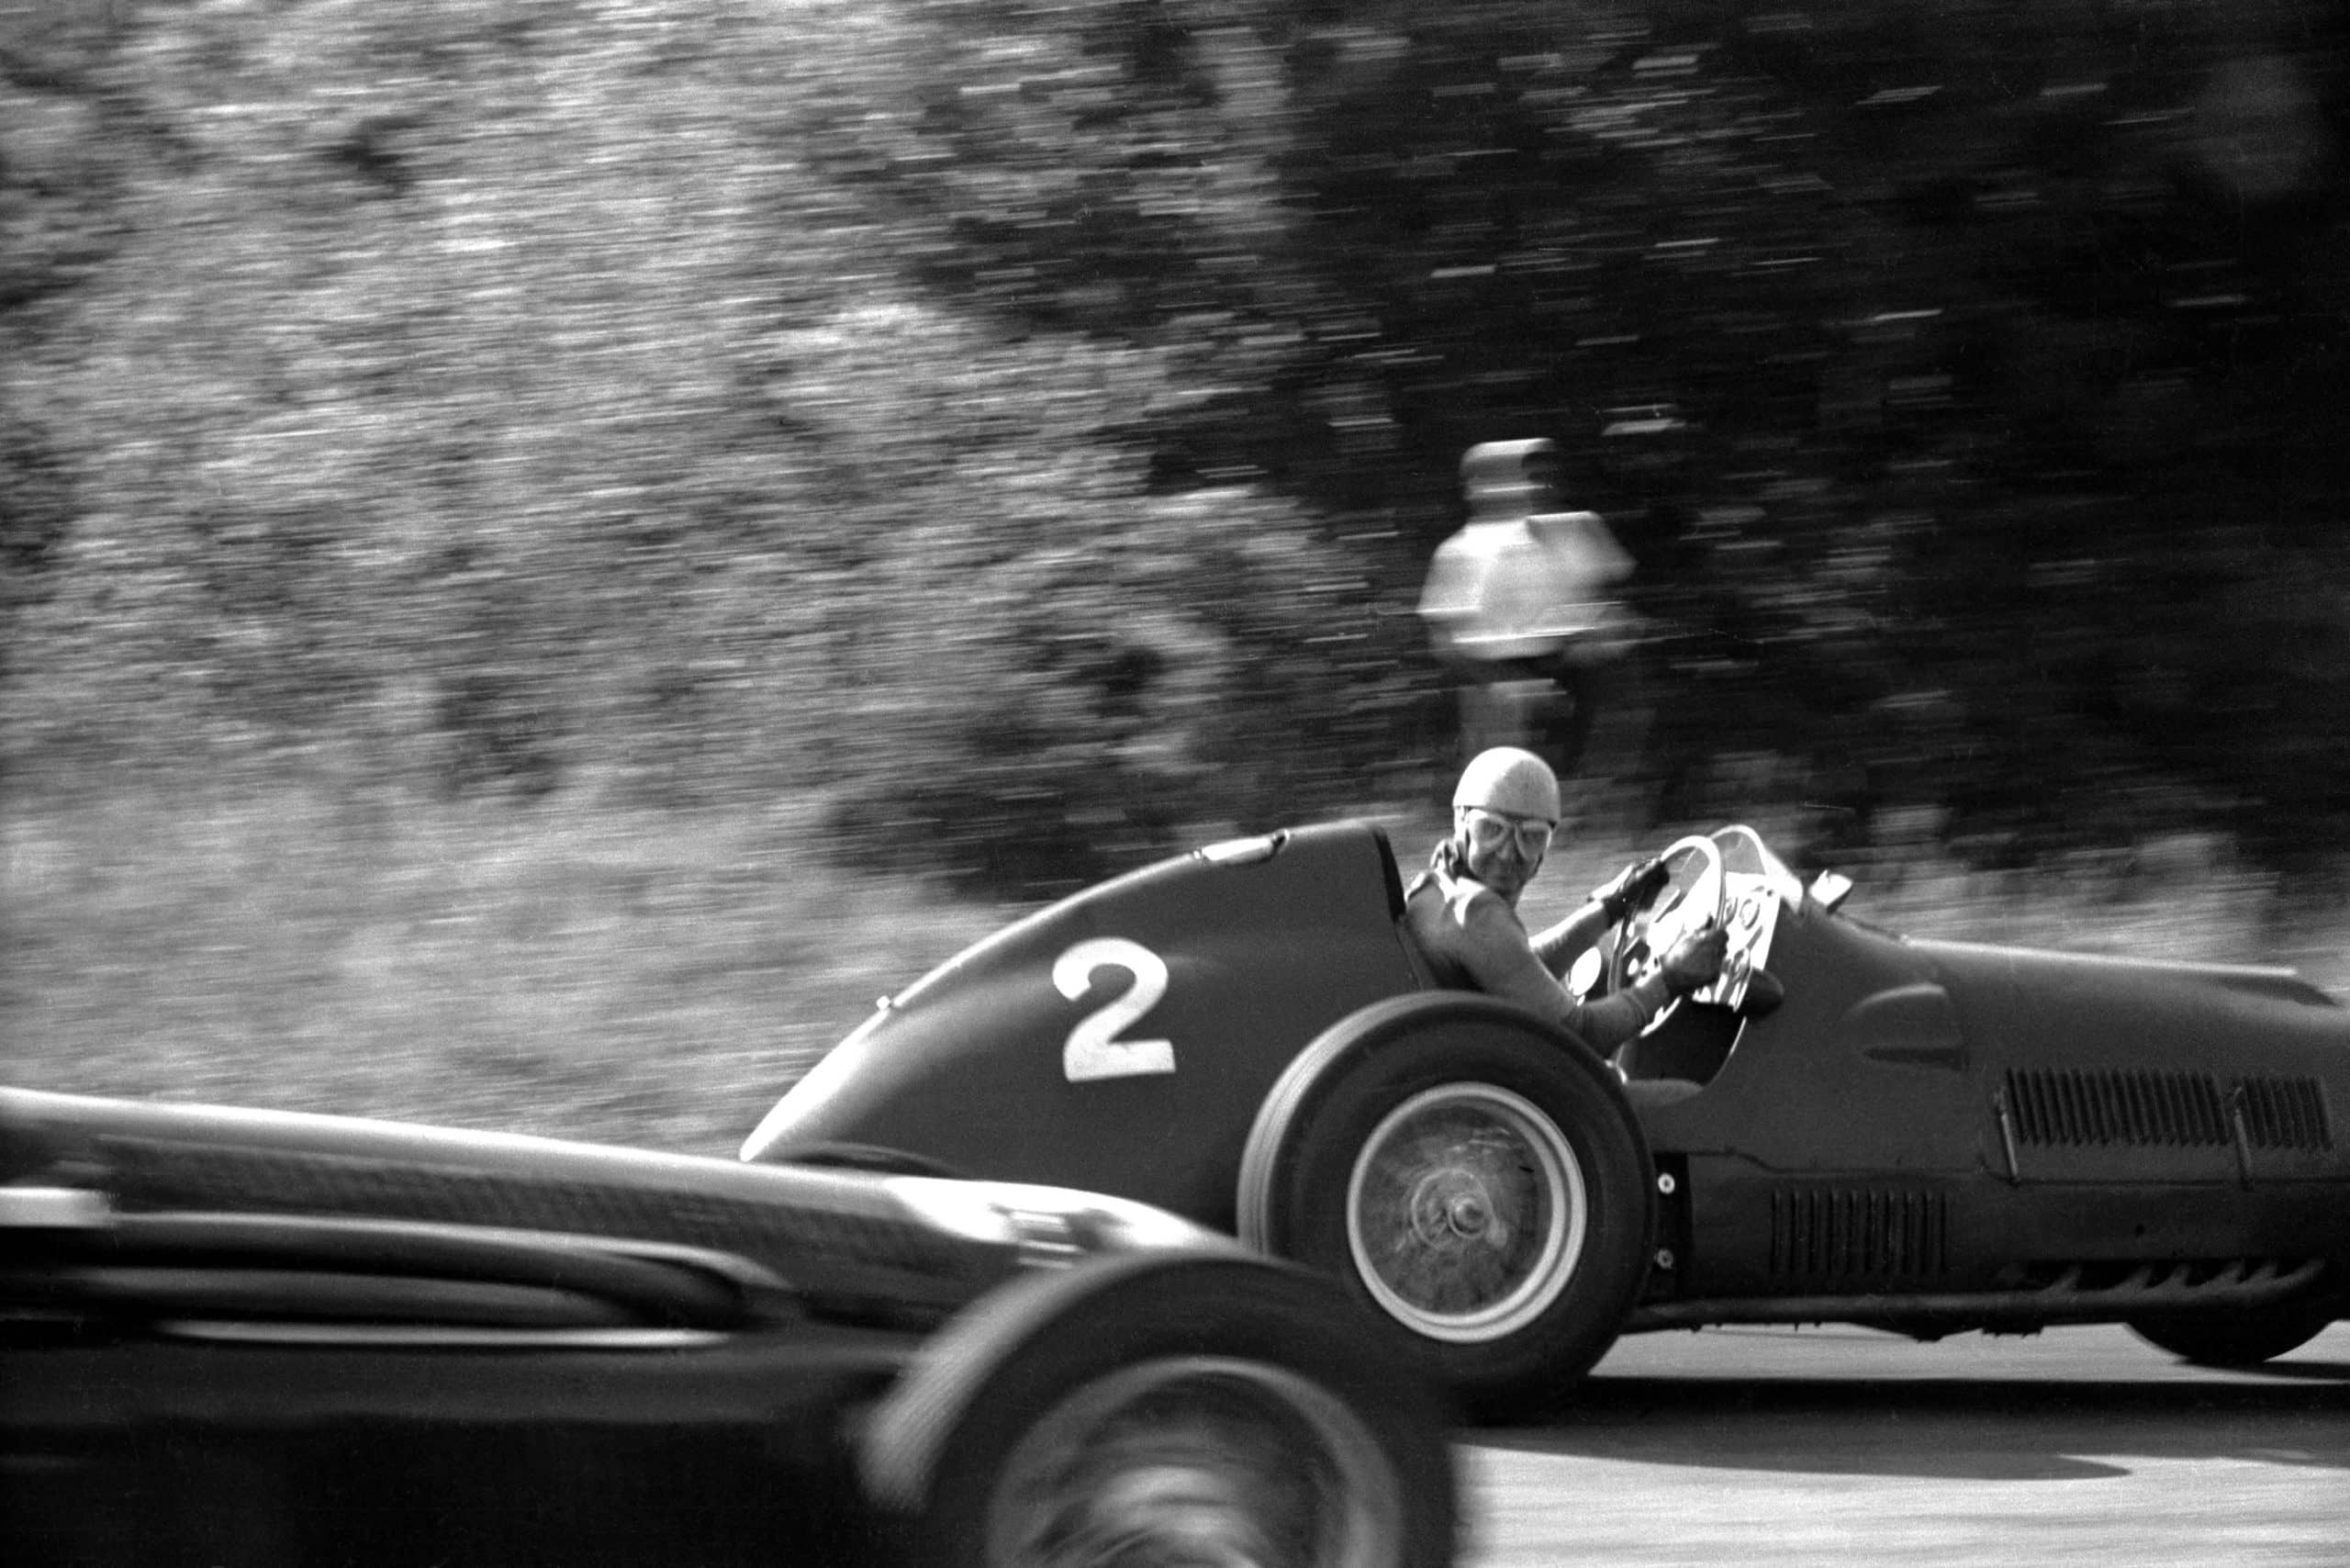 Between the two 'Porfido' corners at Monza (now the Parabolica) Alberto Ascari looks back over his shoulder from his Ferrari 375/F1 and directly into Klemantaski?s camera during the Italian Grand Prix at Monza, 16th September 1951. (Photo by Klemantaski Collection/Getty Images)